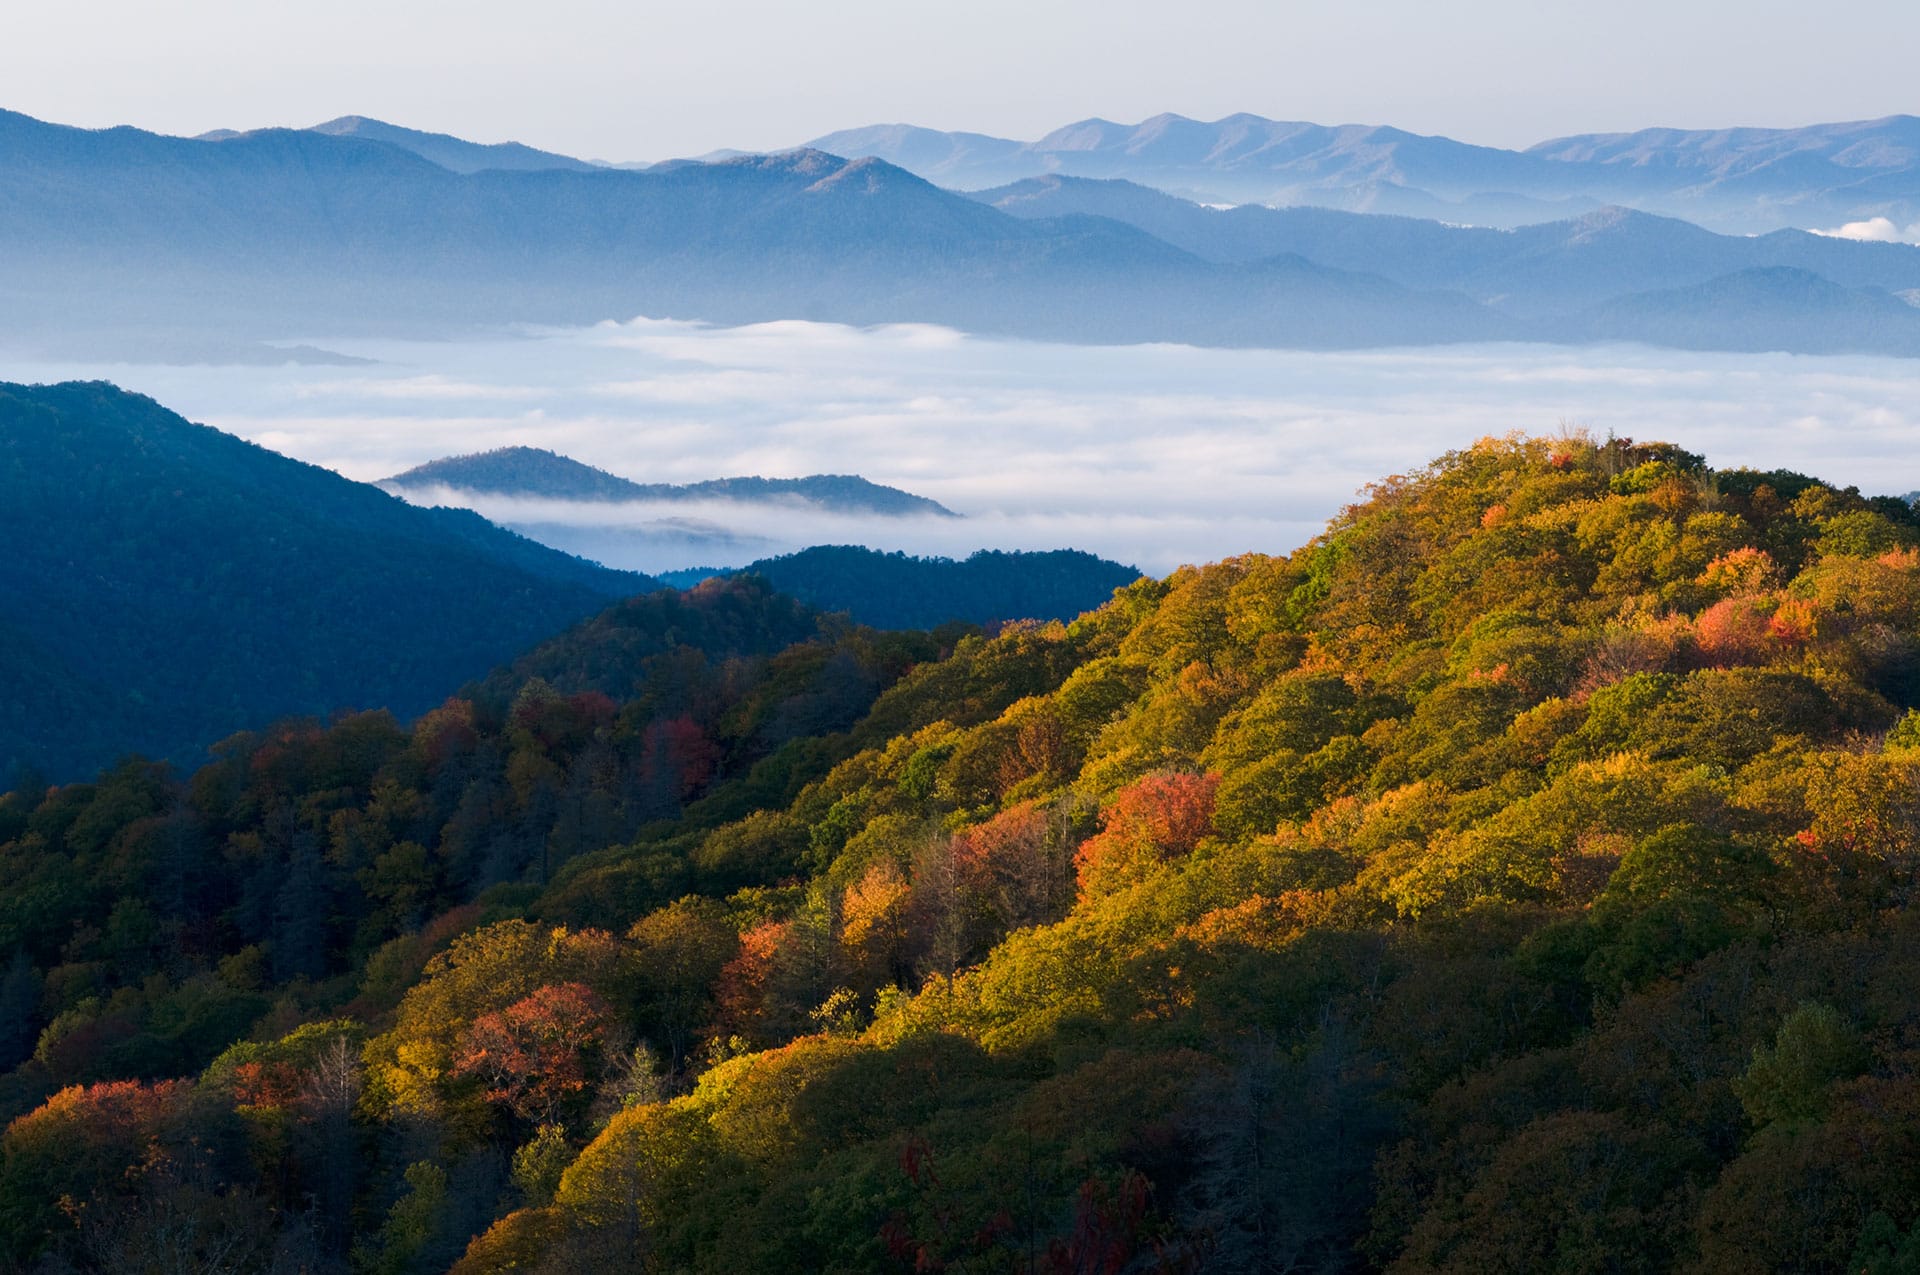 The Most Fabulous Things to Do on the Blue Ridge Parkway